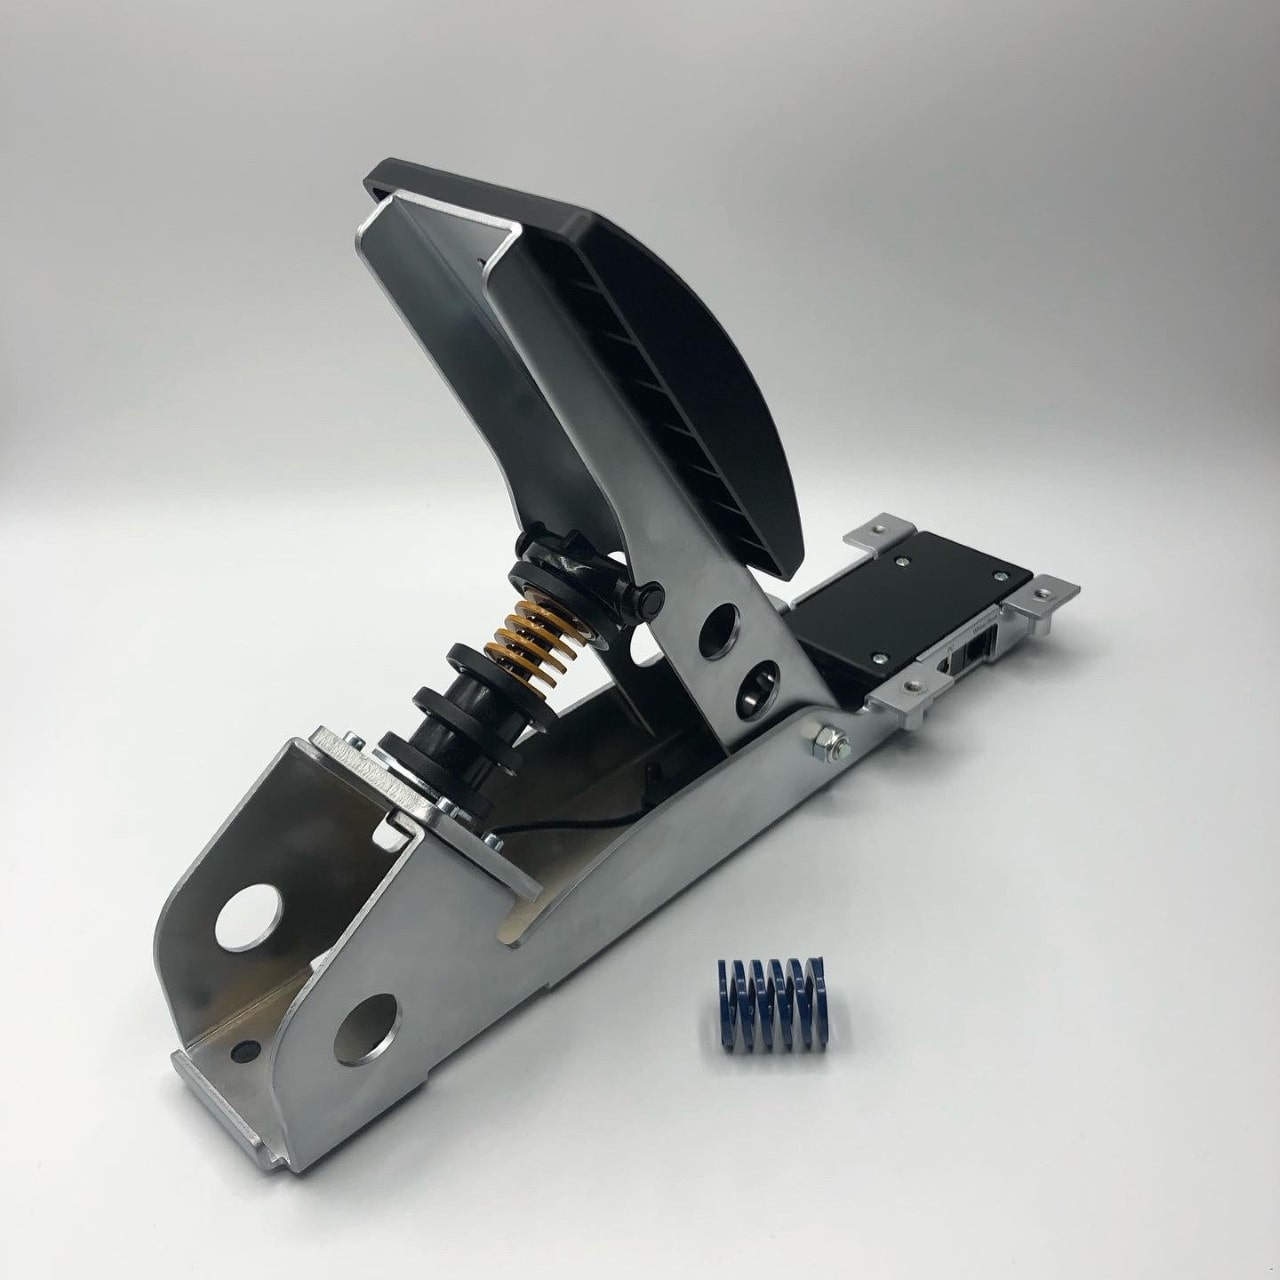 Race Sim Engineering brake upgrade kit installed on the Fanatec CSL Pedals load cell